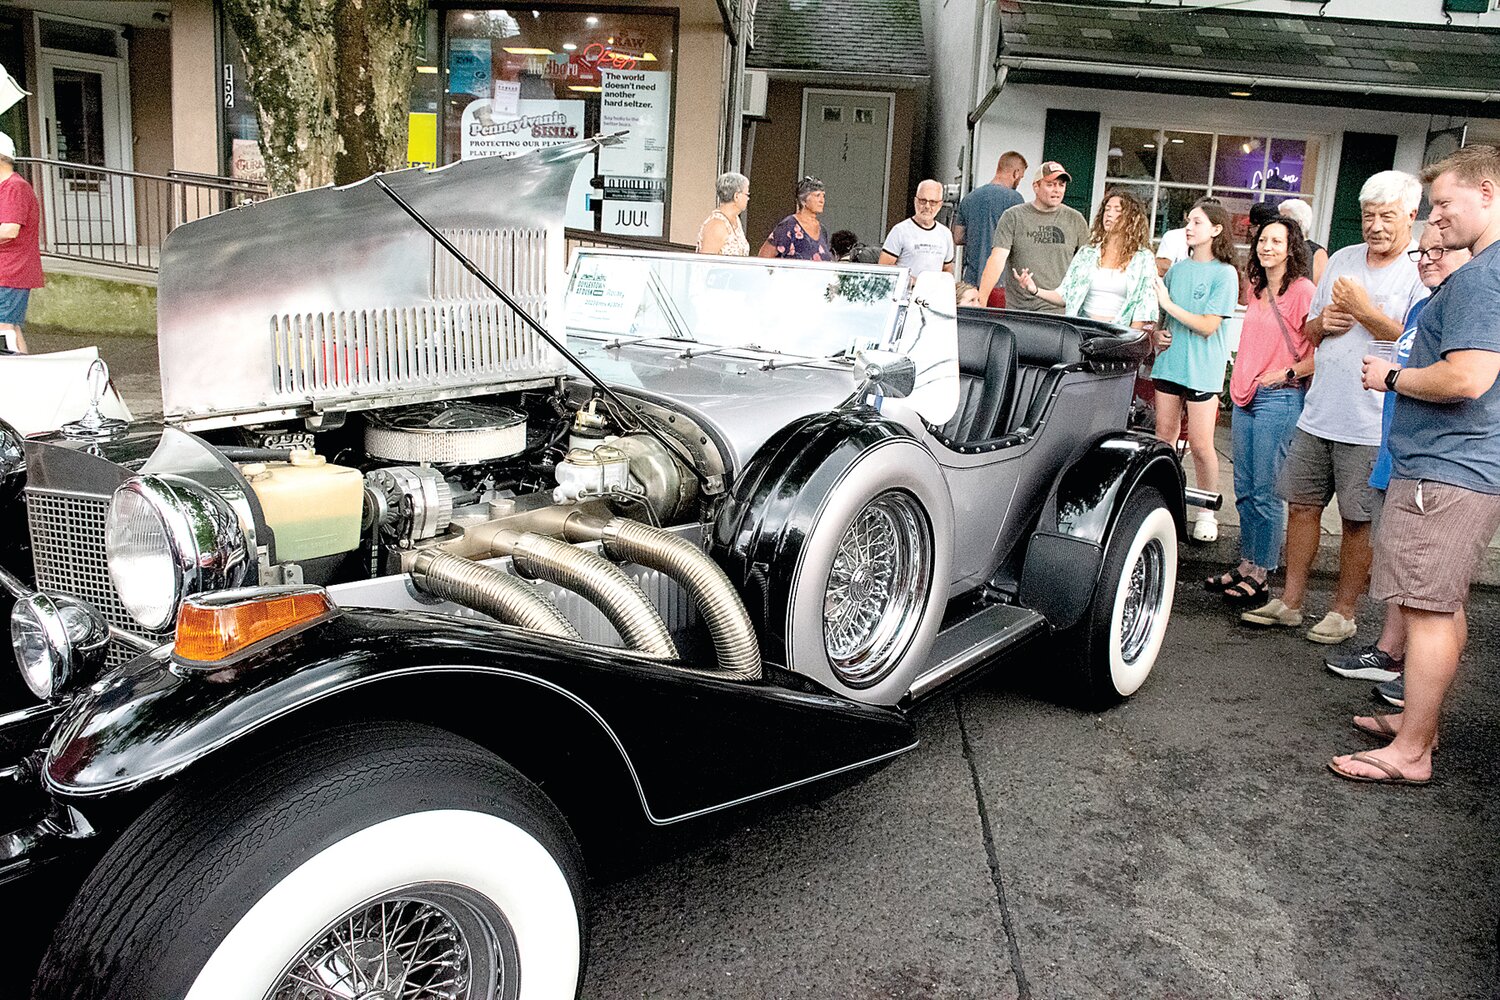 Richard Witt and his 1979 Excalibur Phaeton capture an audience after the rain.